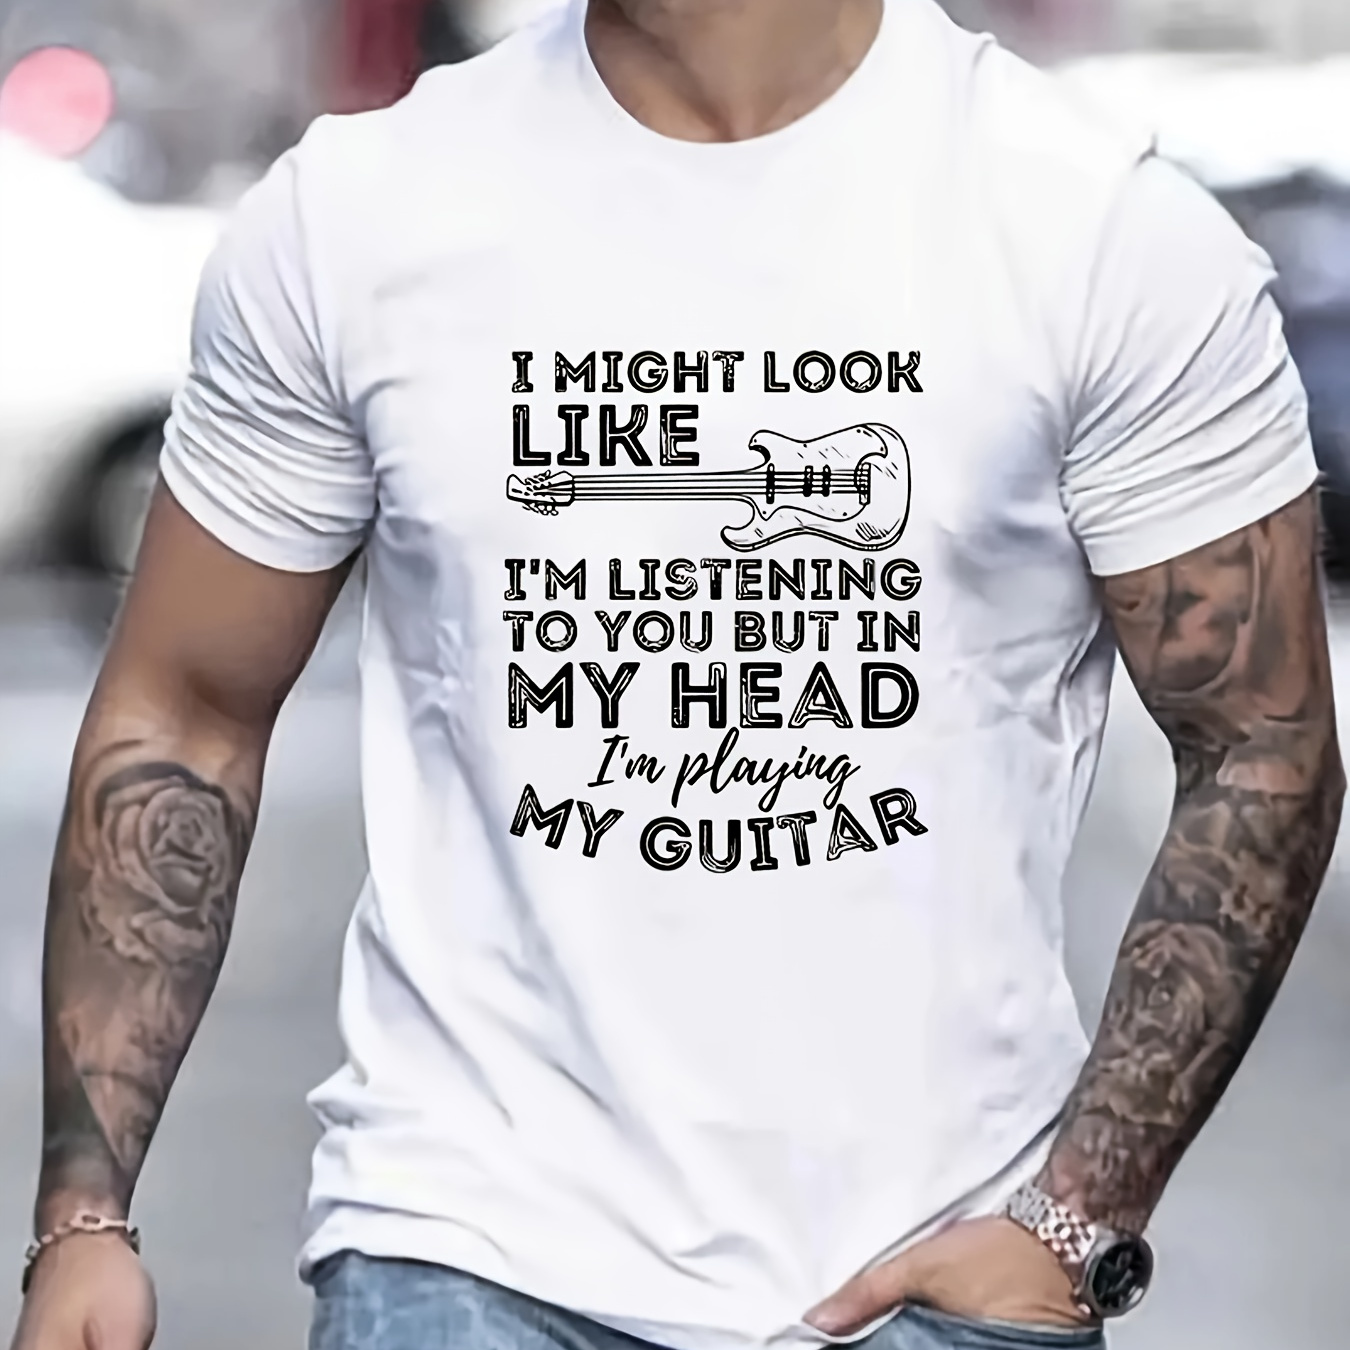 

But In My Head I'm Playing My Guitar Print T Shirt, Tees For Men, Casual Short Sleeve T-shirt For Summer